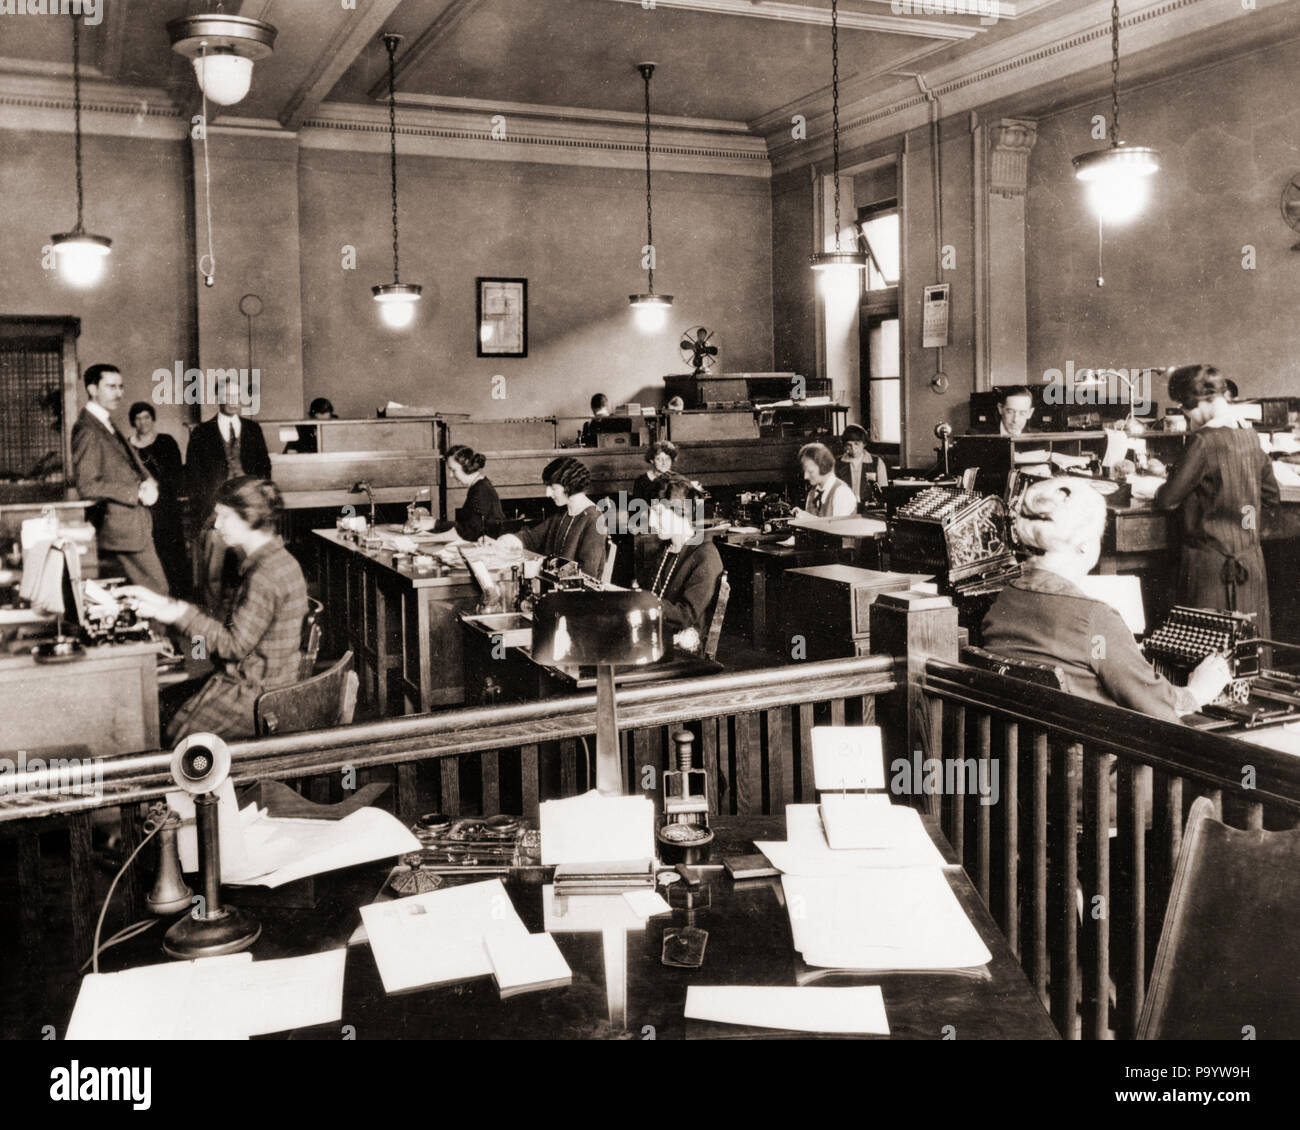 1910s 1920s BUSINESS OFFICE WITH WOMEN SITTING AT DESKS IN BULLPEN AREA - o2383 SPL001 HARS COPY SPACE HALF-LENGTH LADIES PERSONS MALES PROFESSION B&W DESKS MEN AND WOMEN DECOR OCCUPATION TYPING AND INTERIORS WORKFORCE OCCUPATIONS MANLY MEMBERS ELECTRIC LIGHTS BULLPEN MEMBER MID-ADULT MID-ADULT MAN MID-ADULT WOMAN YOUNG ADULT WOMAN BLACK AND WHITE CAUCASIAN ETHNICITY OLD FASHIONED Stock Photo